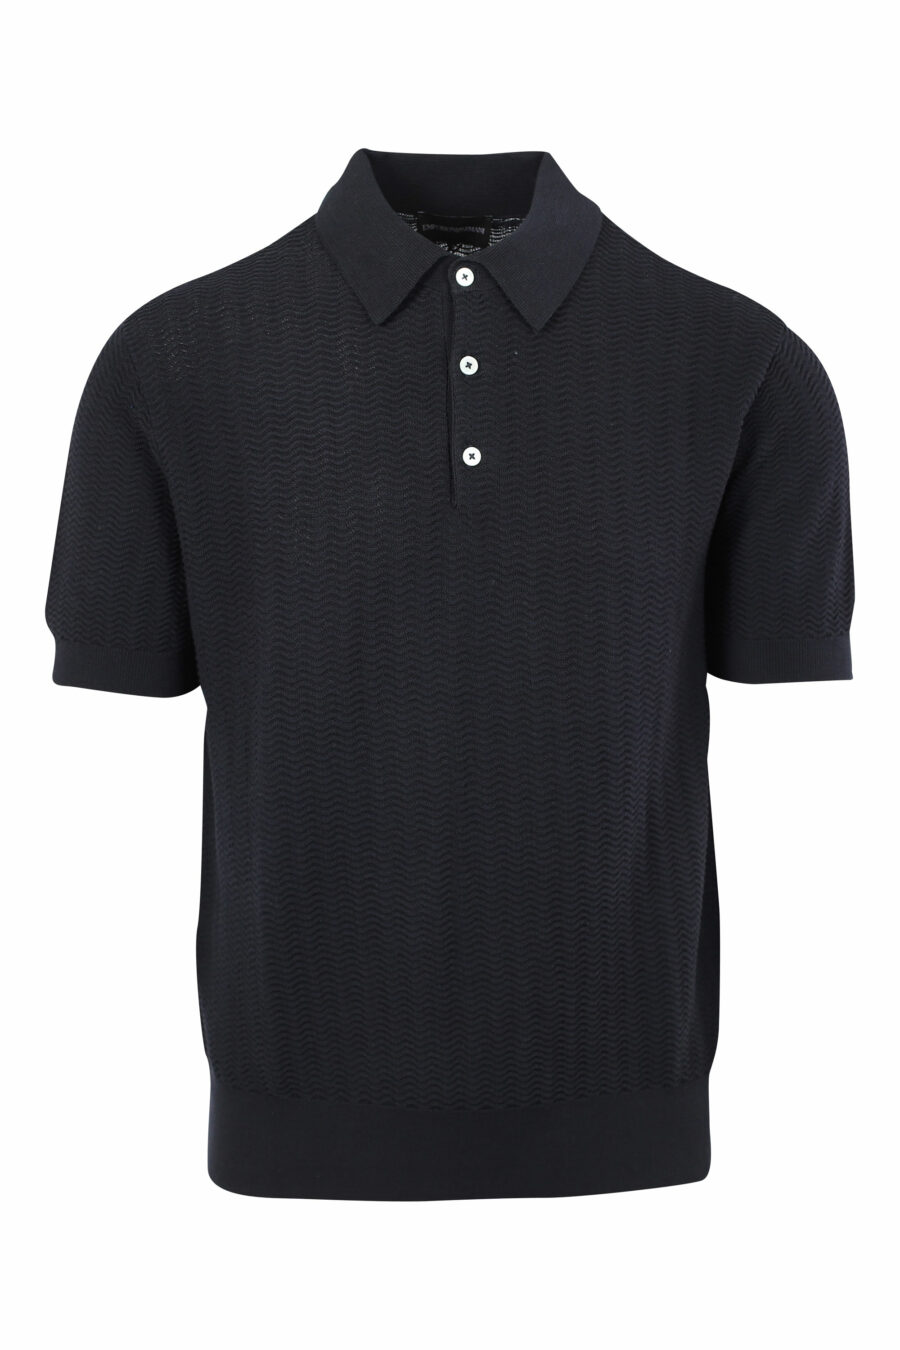 Dark blue knitted polo shirt with mini logo - IMG 9670